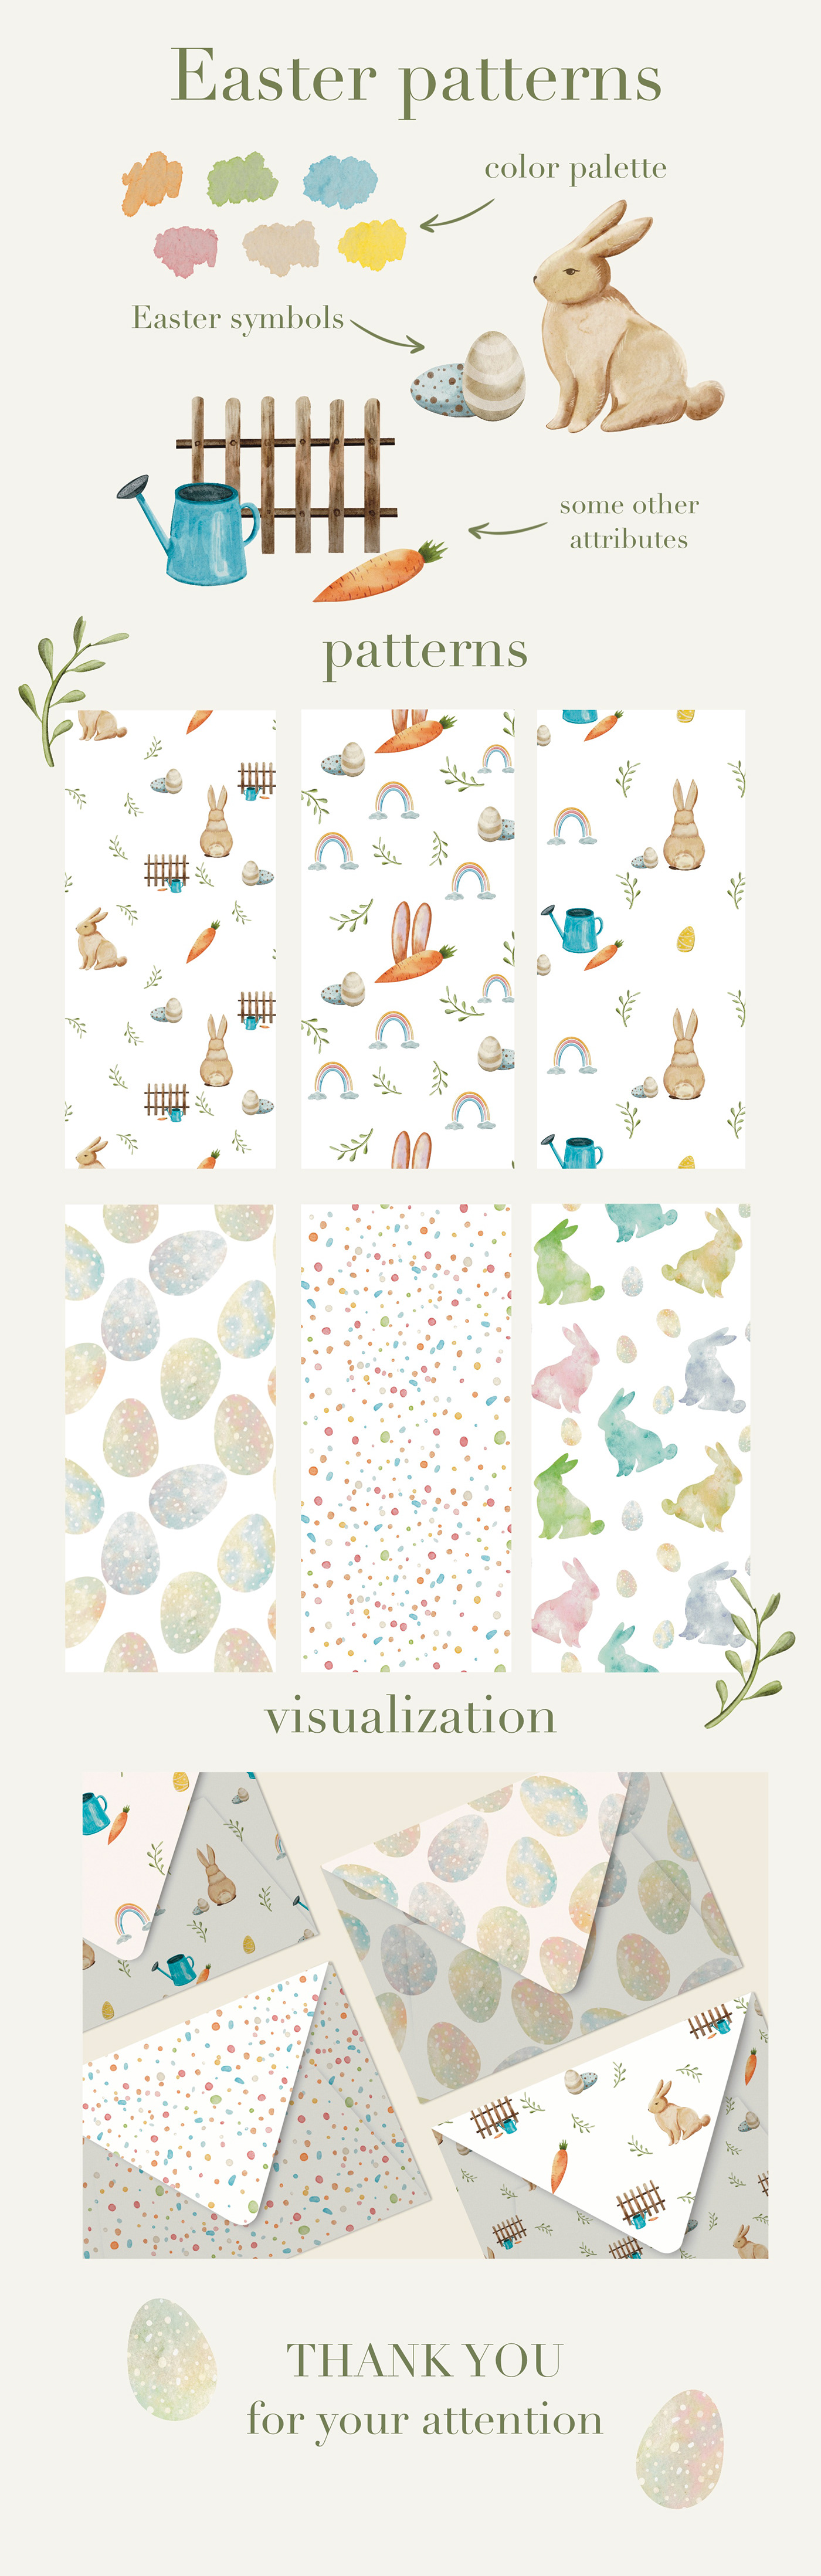 Easter watercolor patterns with all symbols and attributes.